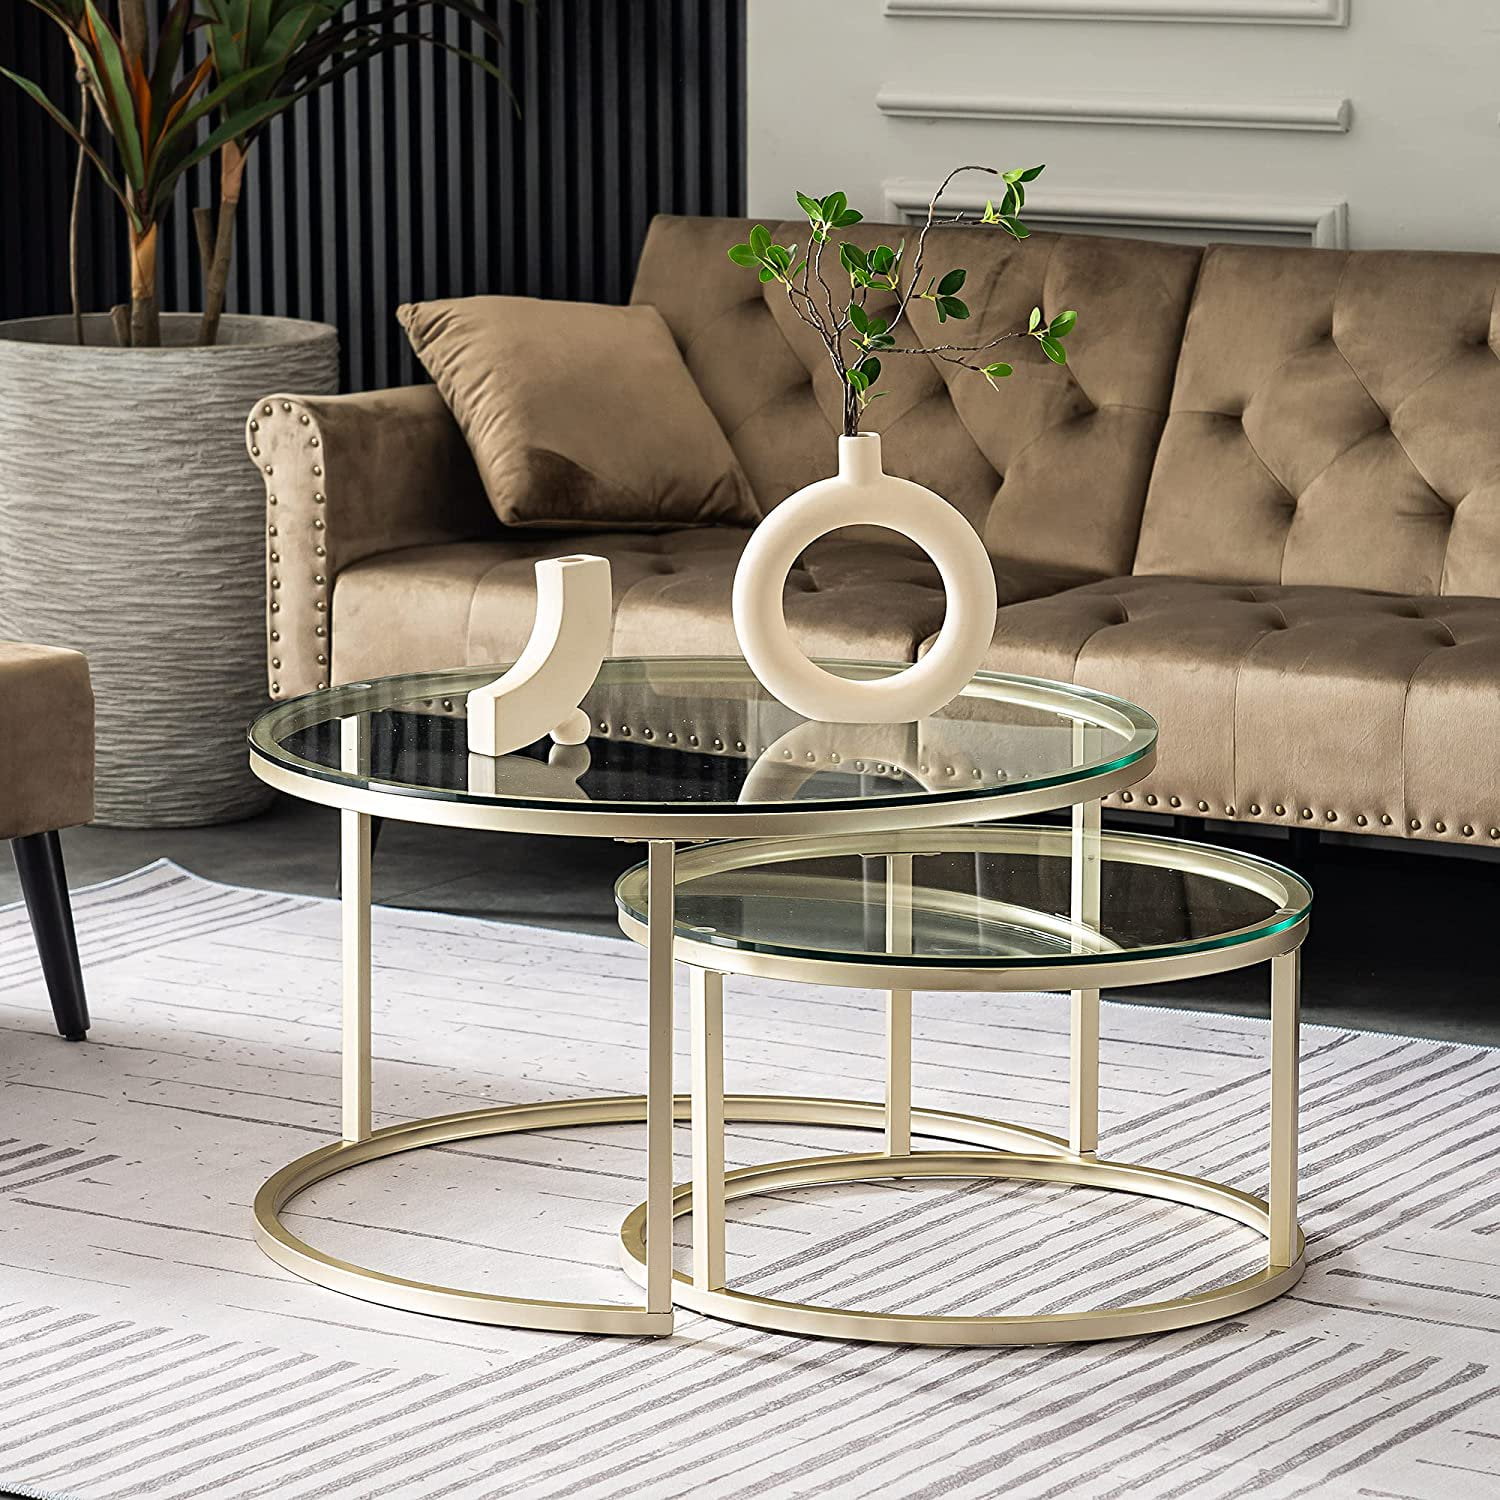 Voorouder porselein veiligheid HOMEFORT Round Nesting Coffee Table Set of 2, 31.5'' Modern Tempered Glass  Coffee Tables for Living Room, Accent Clear Side Tables Set End Tea Table  for Balcony Home Office Cafe (Gold) -